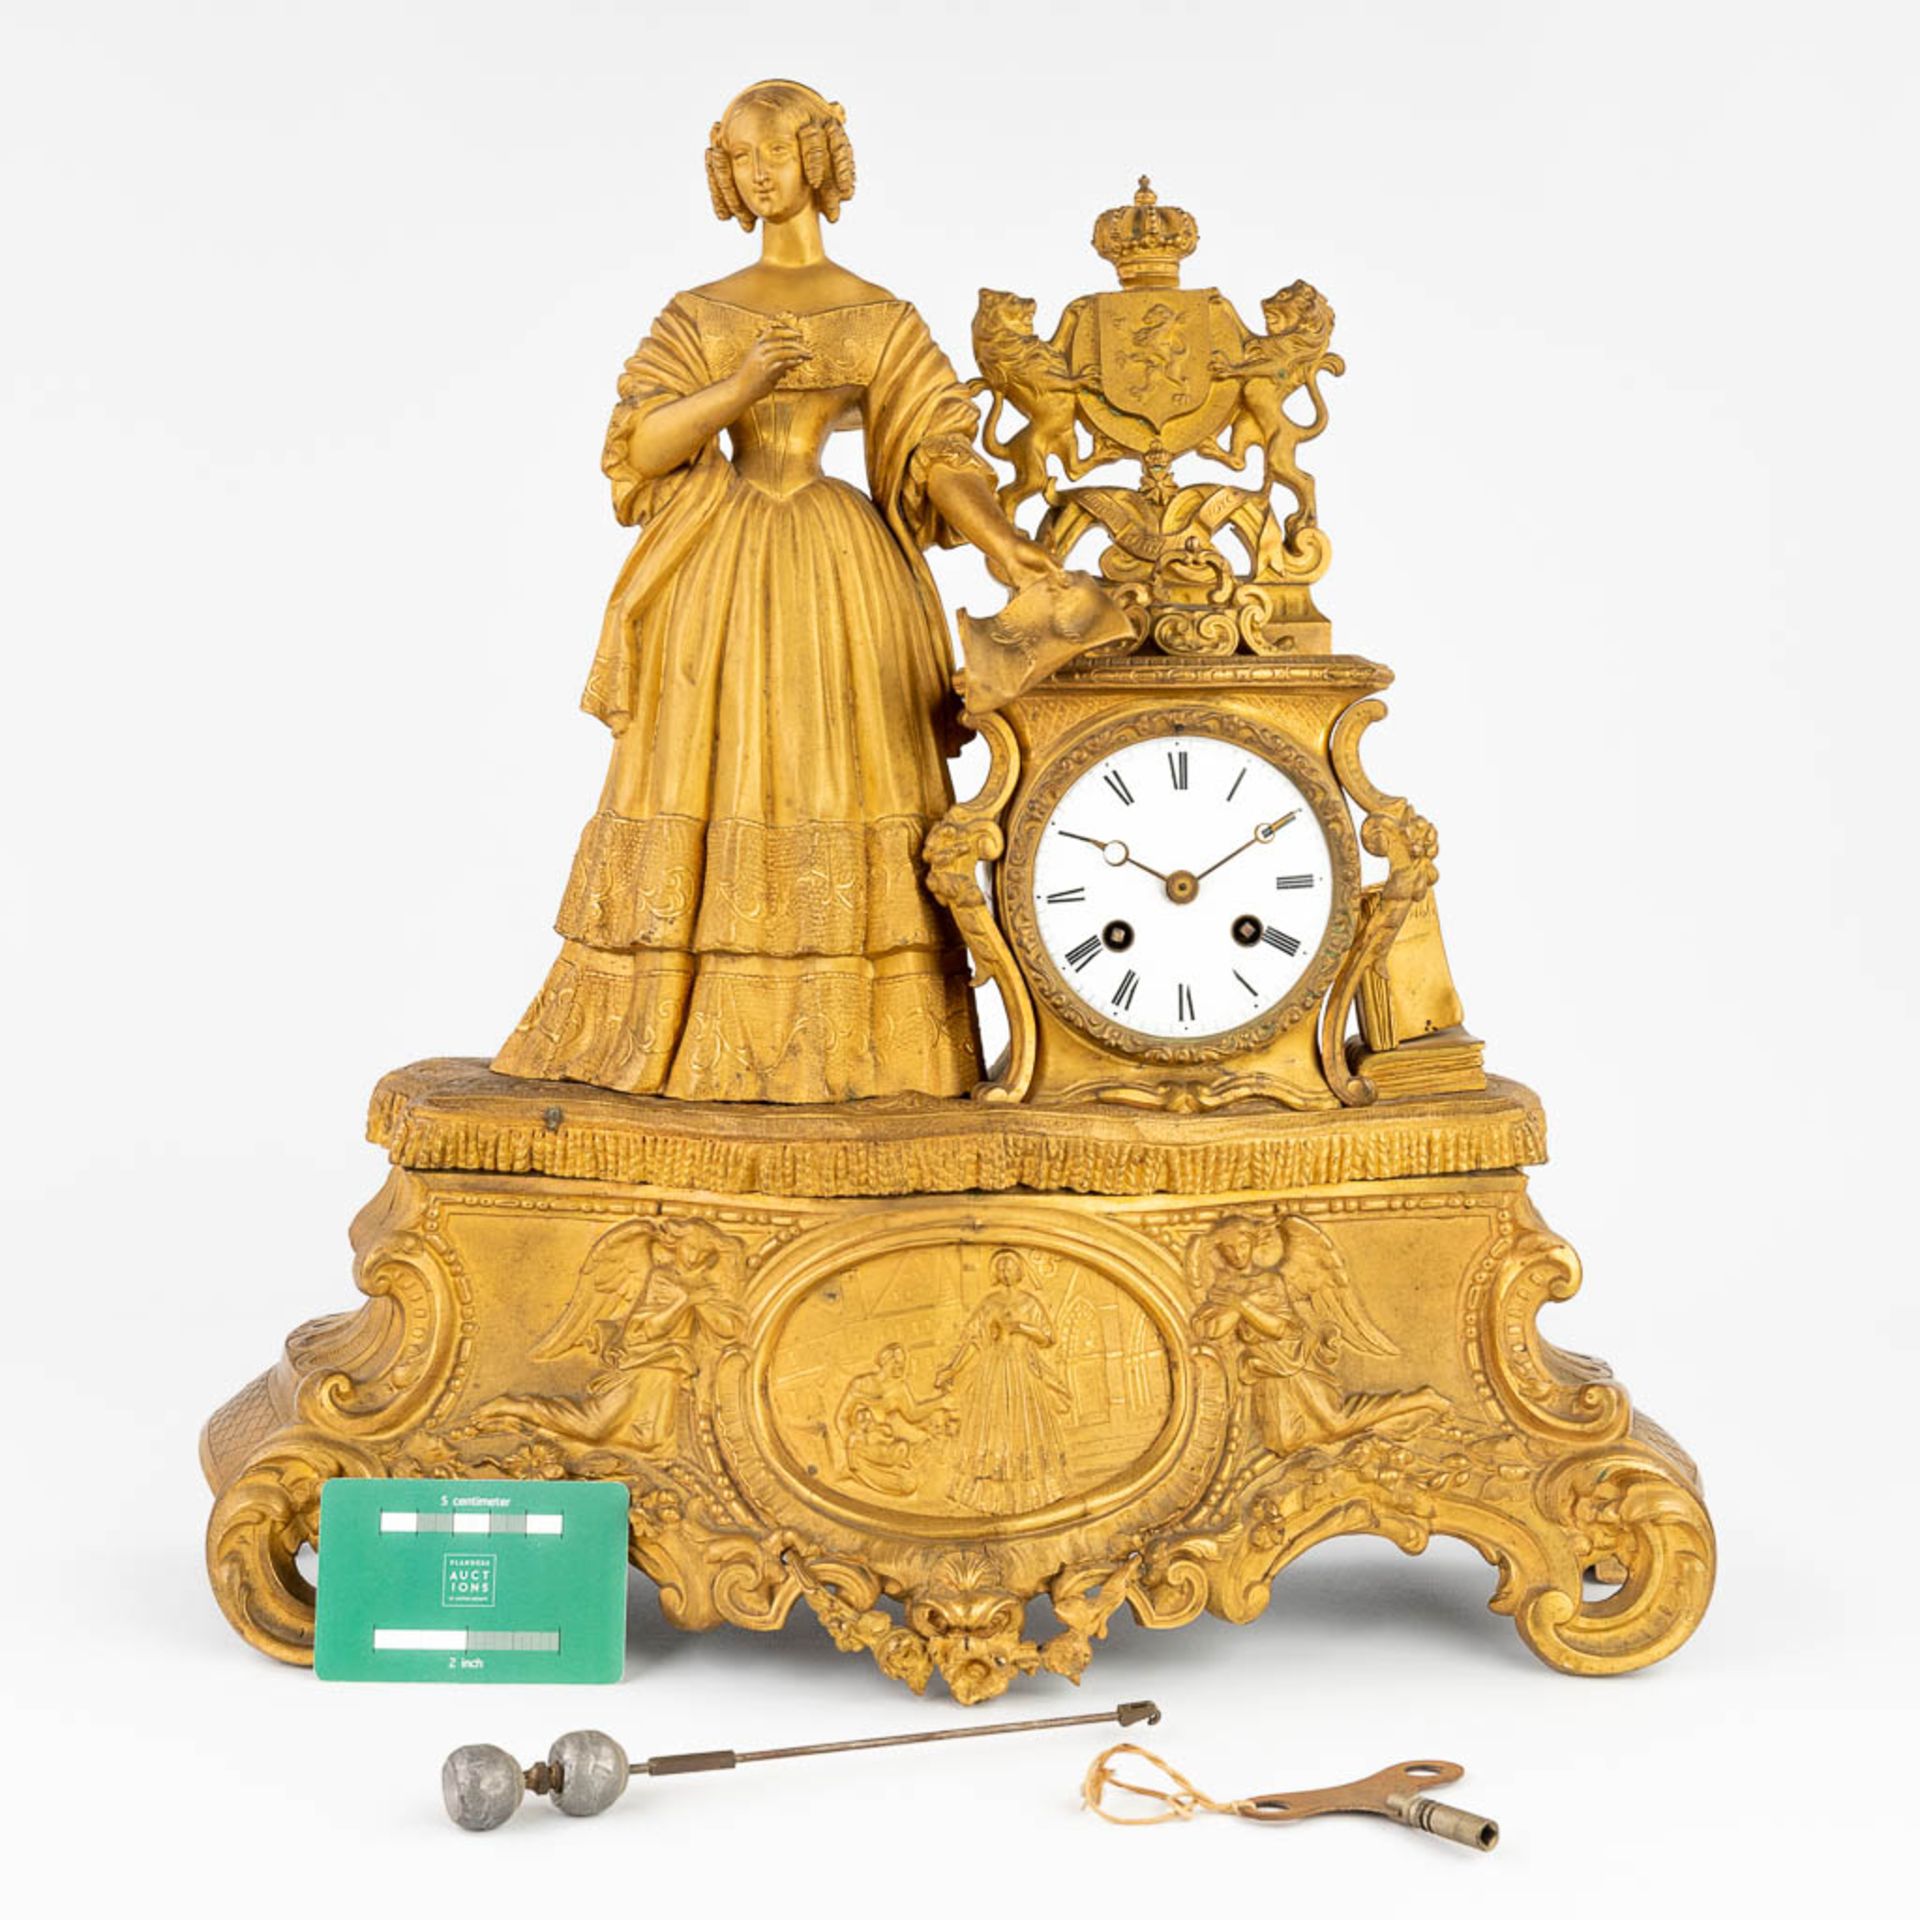 An antique mantle clock made of gilt spelter. 19th C. (44 x 45cm) - Image 12 of 16